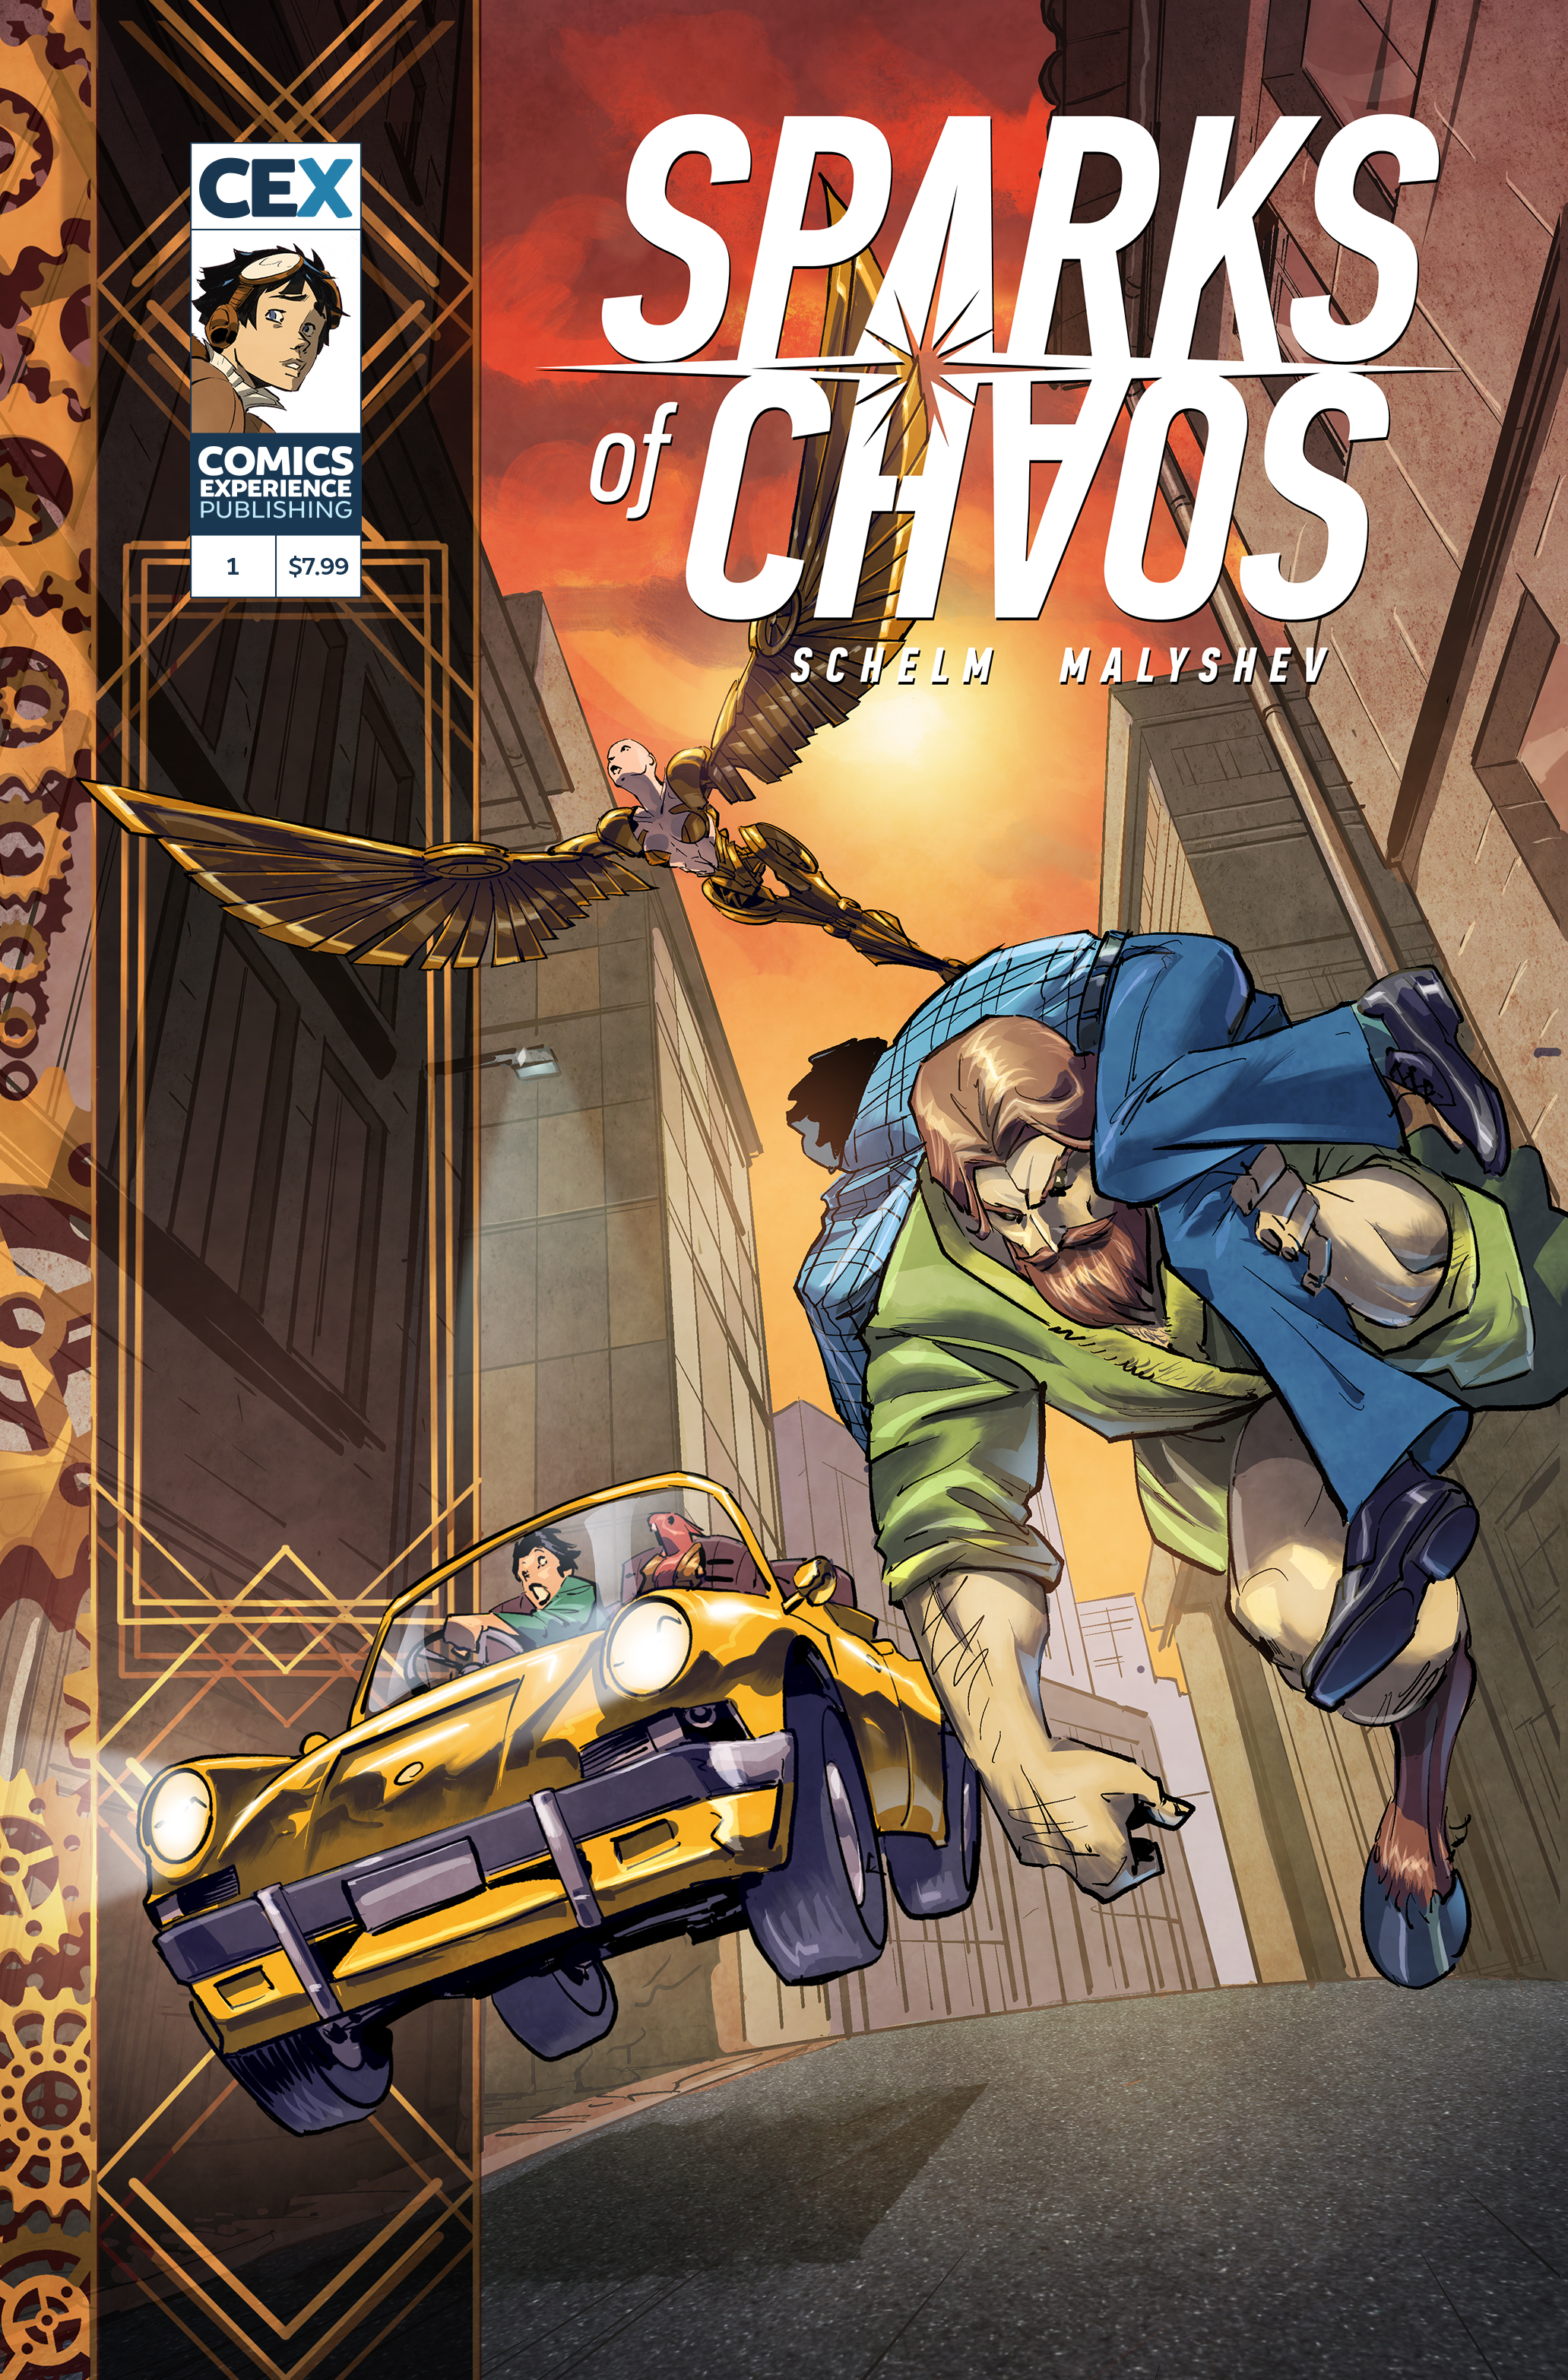 Sparks of Chaos #1 Cover B Alex Malyshev Variant (Of 3)